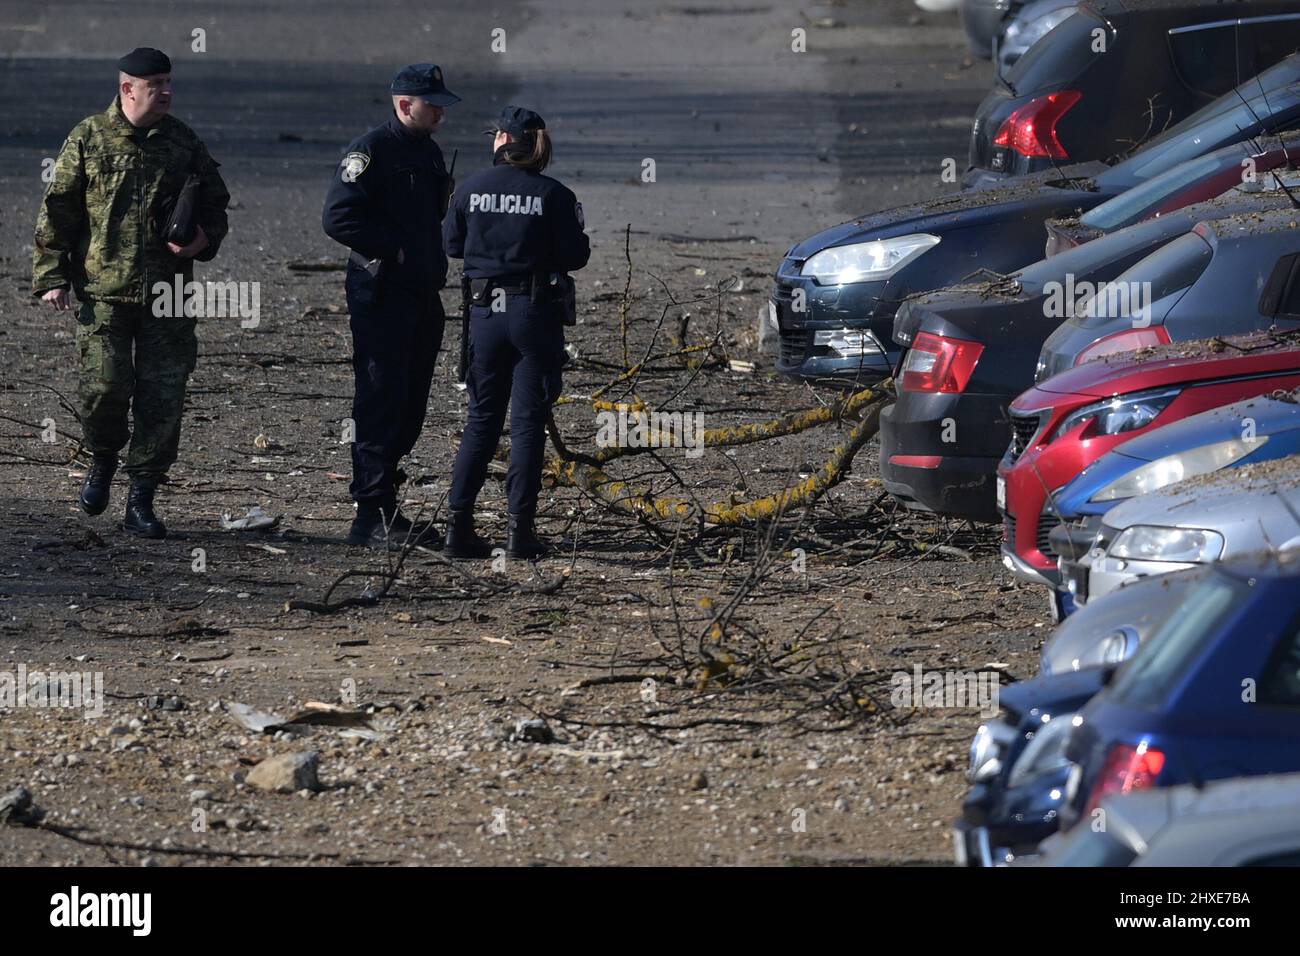 (220312) -- ZAGREB, March 12, 2022 (Xinhua) -- Police conduct an investigation in cooperation with military police after an unidentified military drone crashed in the area of Jaraun, Zagreb on March 10, 2022. An unmanned drone that crashed in the Jarun area of southwest Zagreb late Thursday is of military design and Russian-made, Croatian Prime Minister Andrej Plenkovic said on Friday. The Croatian government said on Friday that the drone had entered Croatian air space from Hungary. On the ground it caused a large crater and two parachutes were found in a wooded area. Some cars at the sce Stock Photo